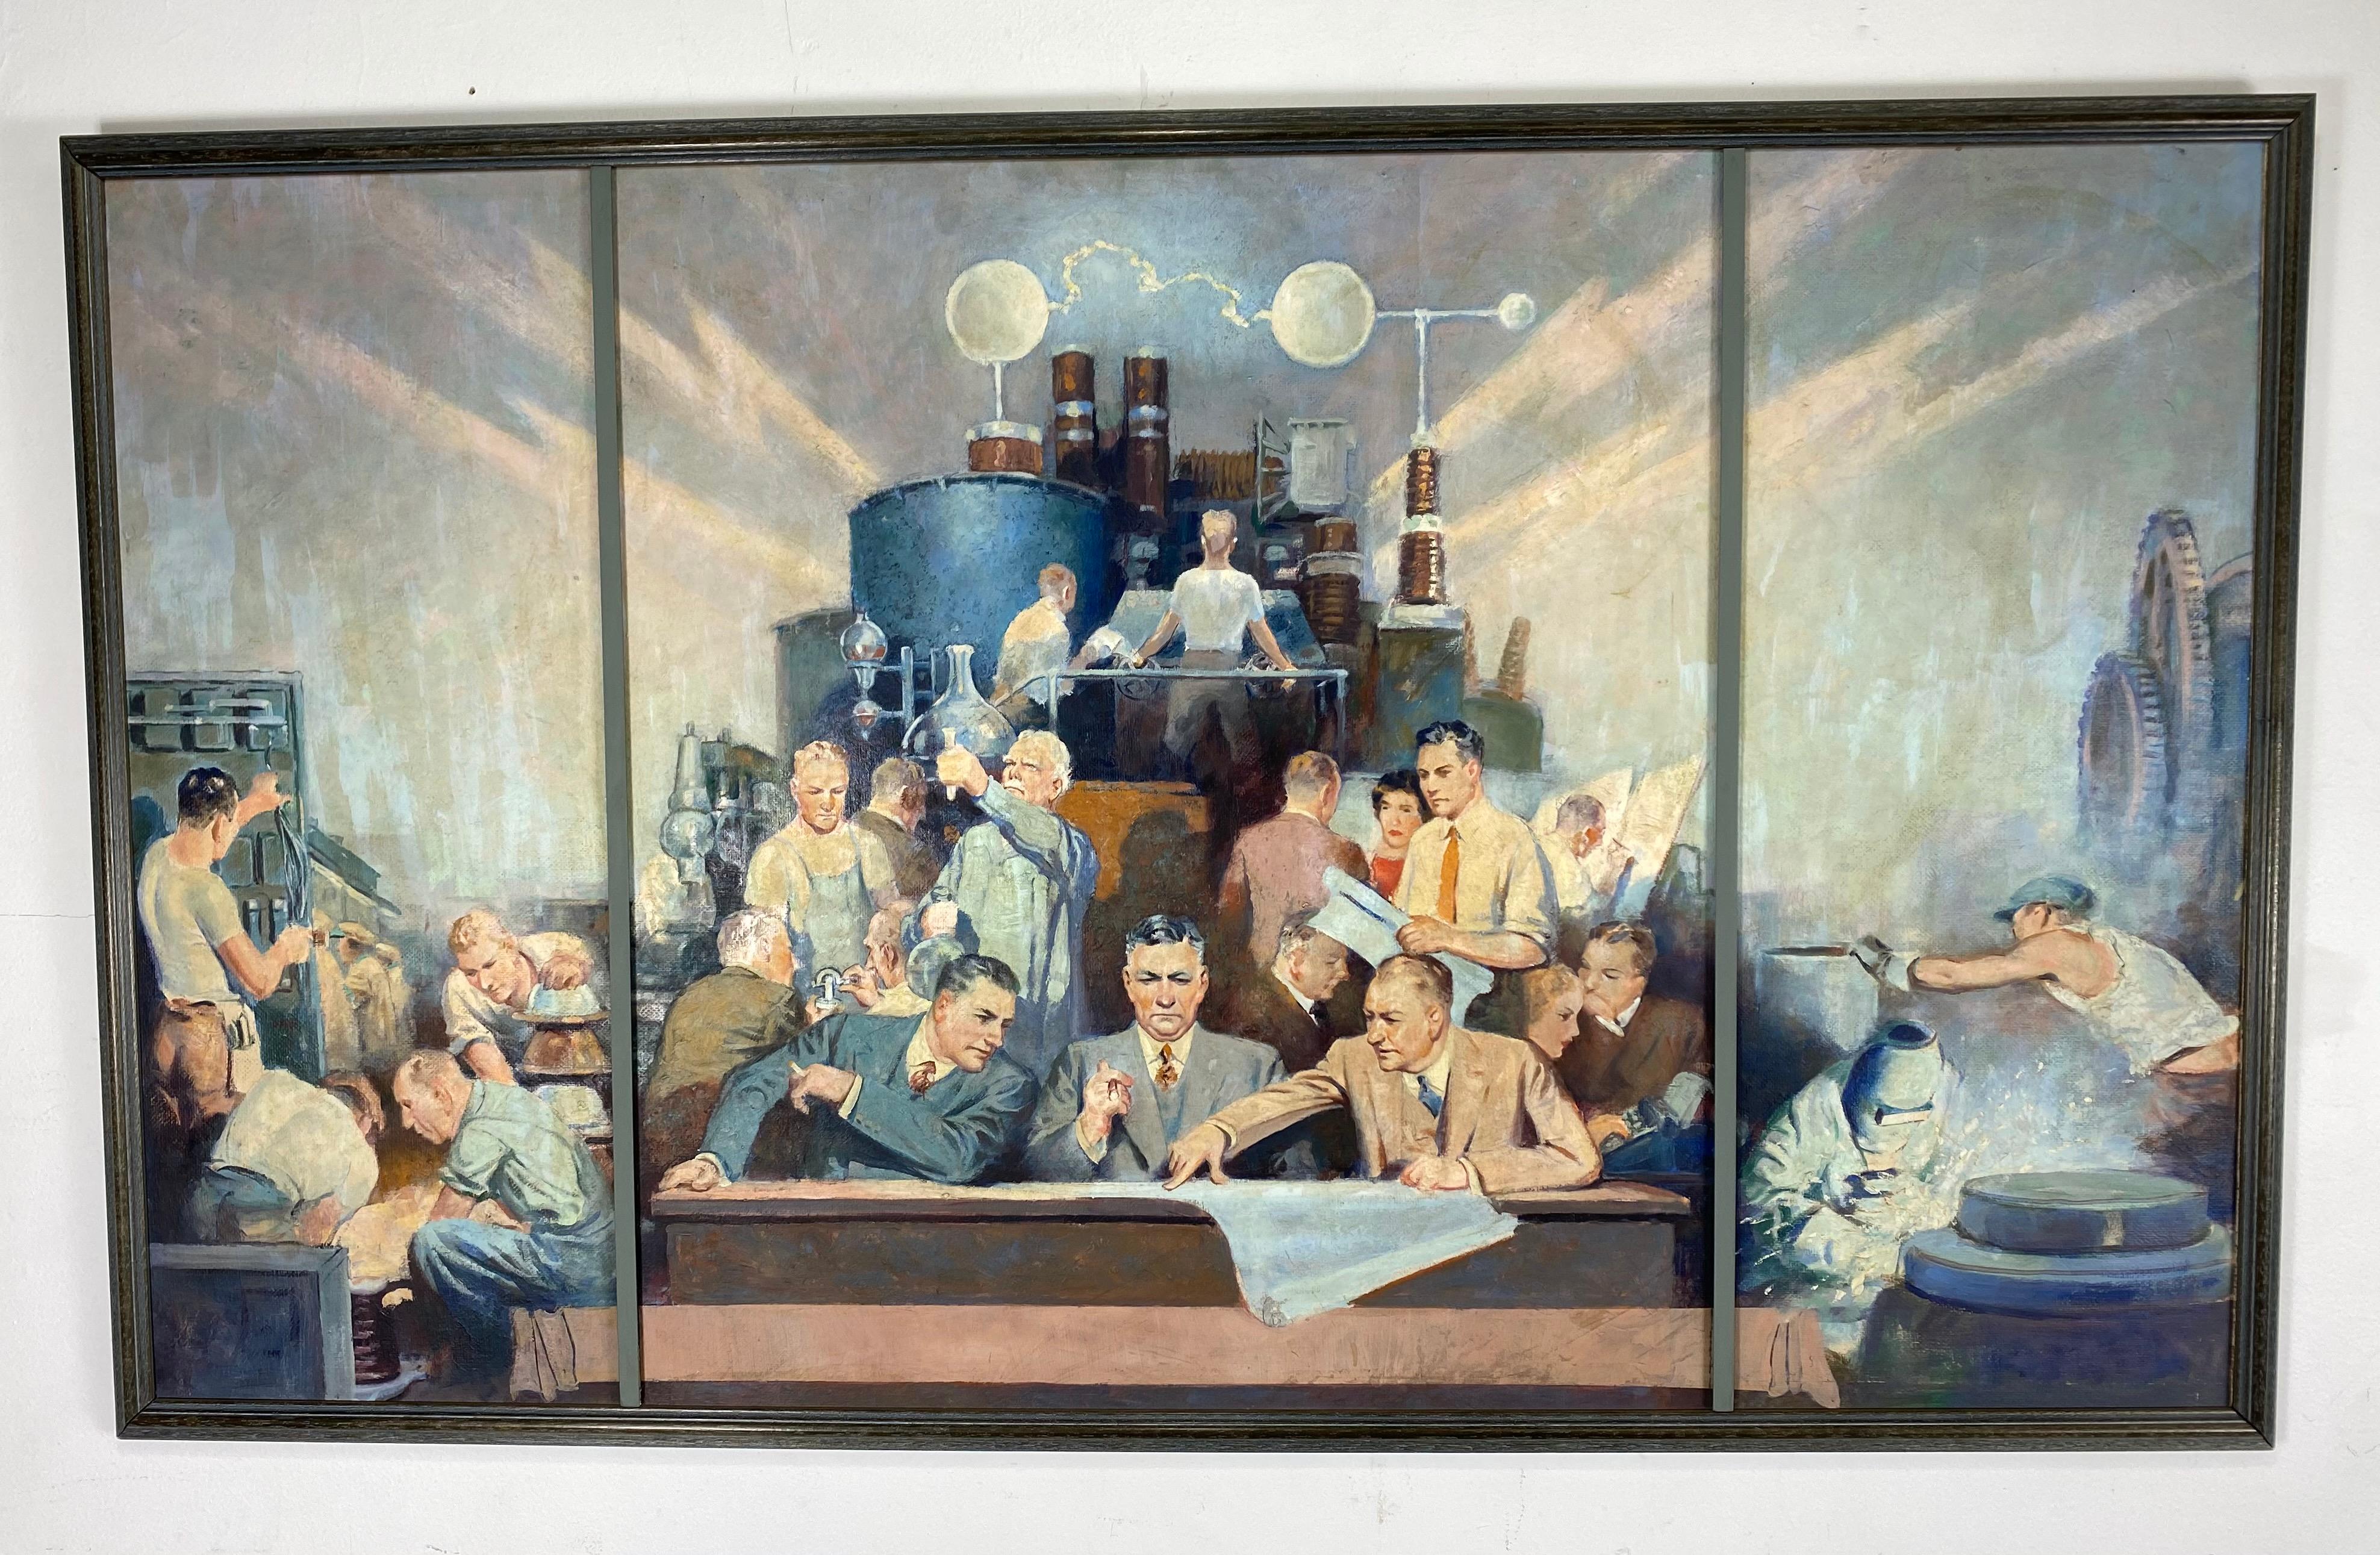 Amazing W.P.A. style painting, trip-tic depicting science, politics industry, worker's, 1940s-1950s. Oil on board, measuring: 52